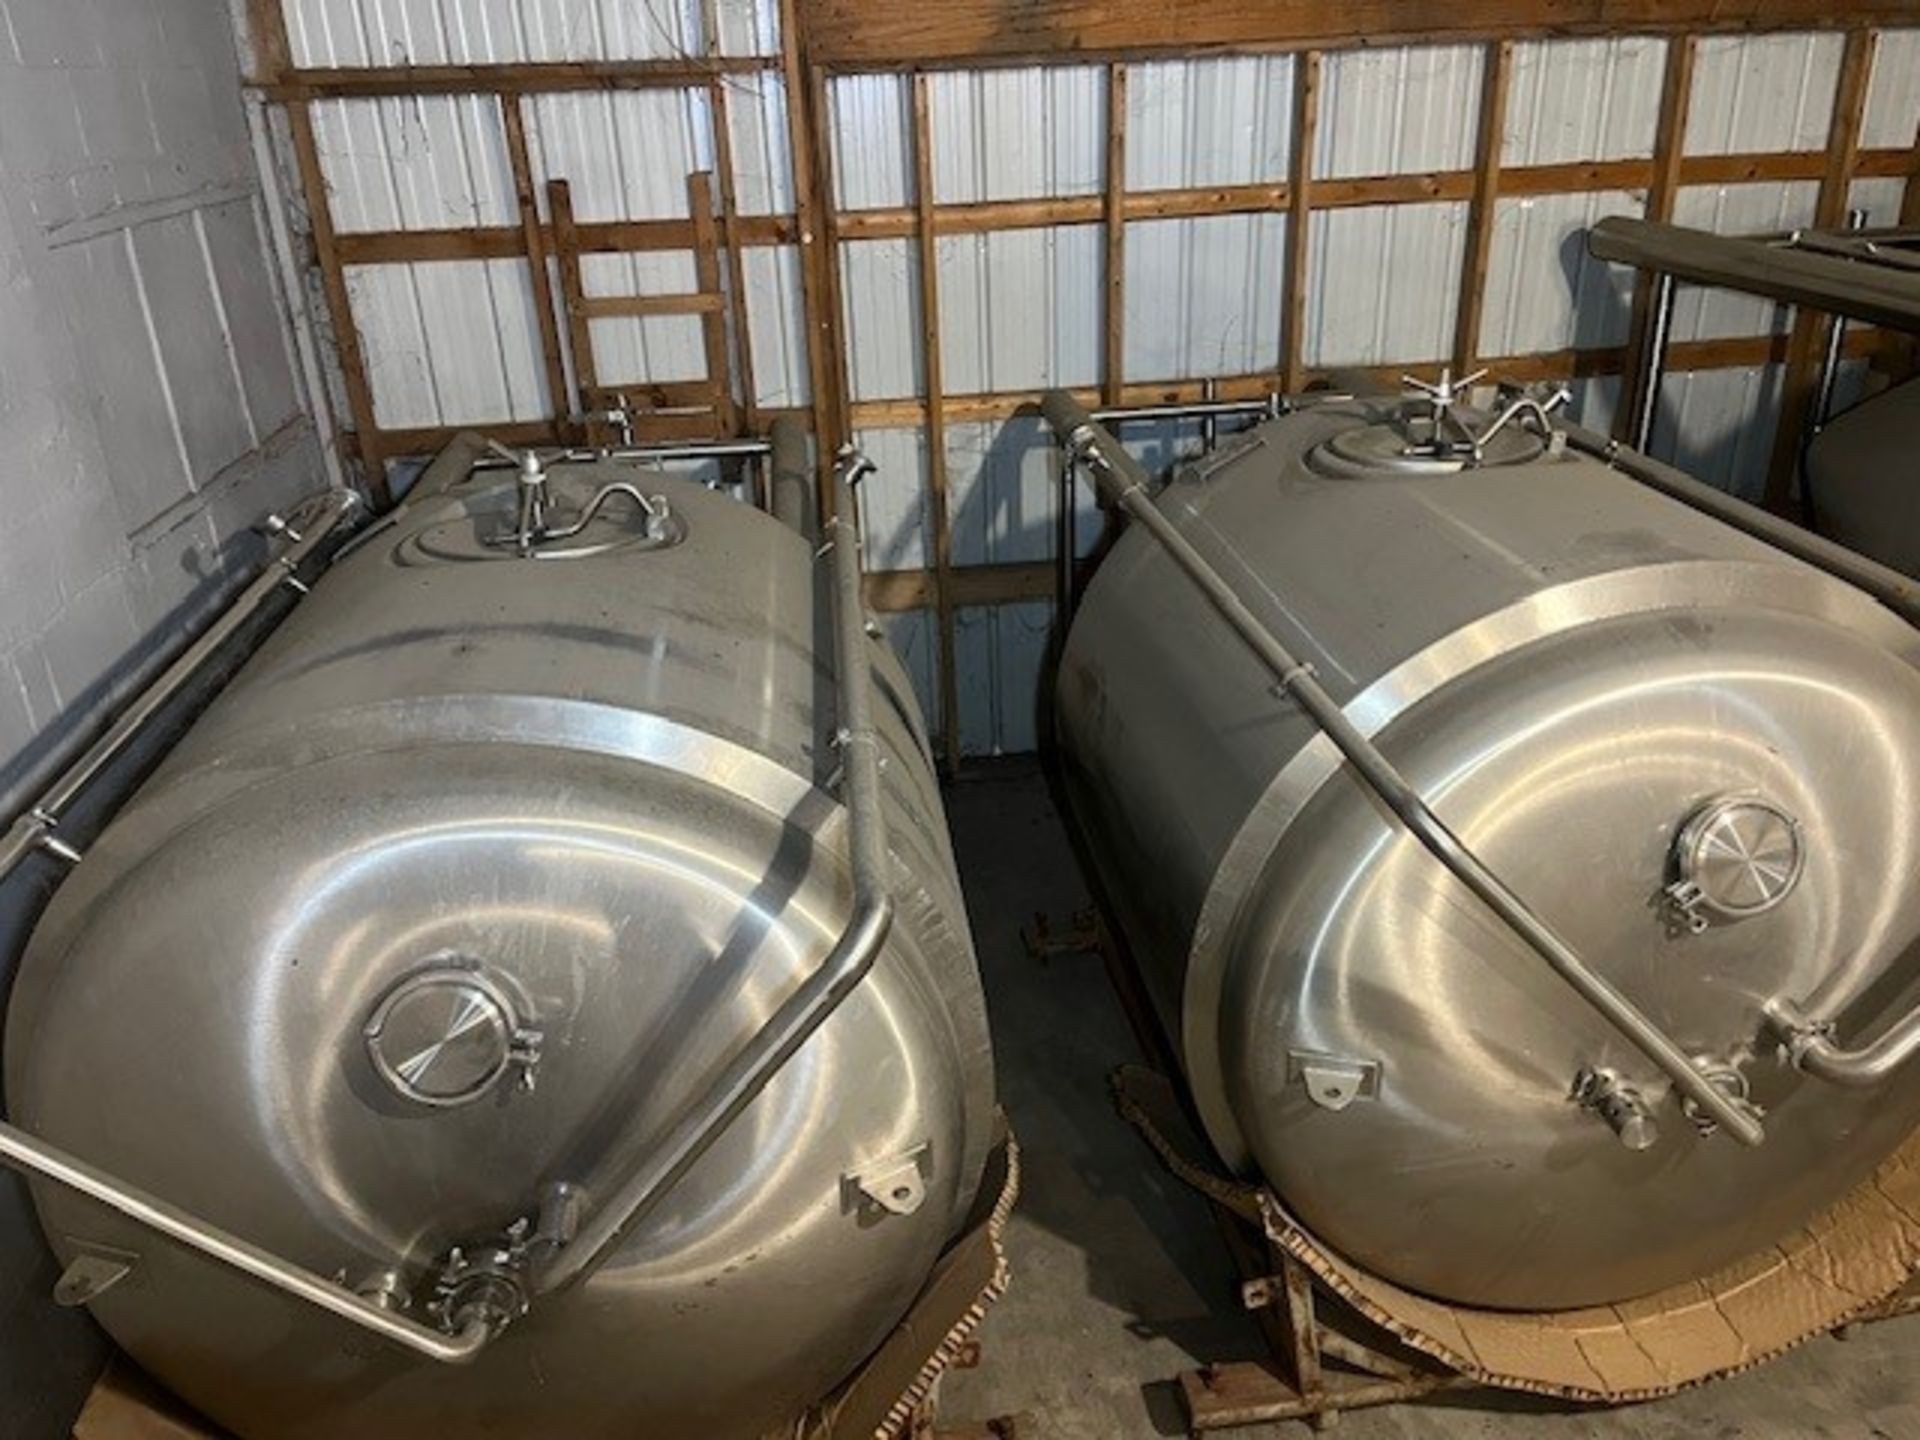 Consignment Item - located in Breese, IL: NEVER USED, Kent 20 bbl Beer Fermenter, from 2014 - Image 4 of 5